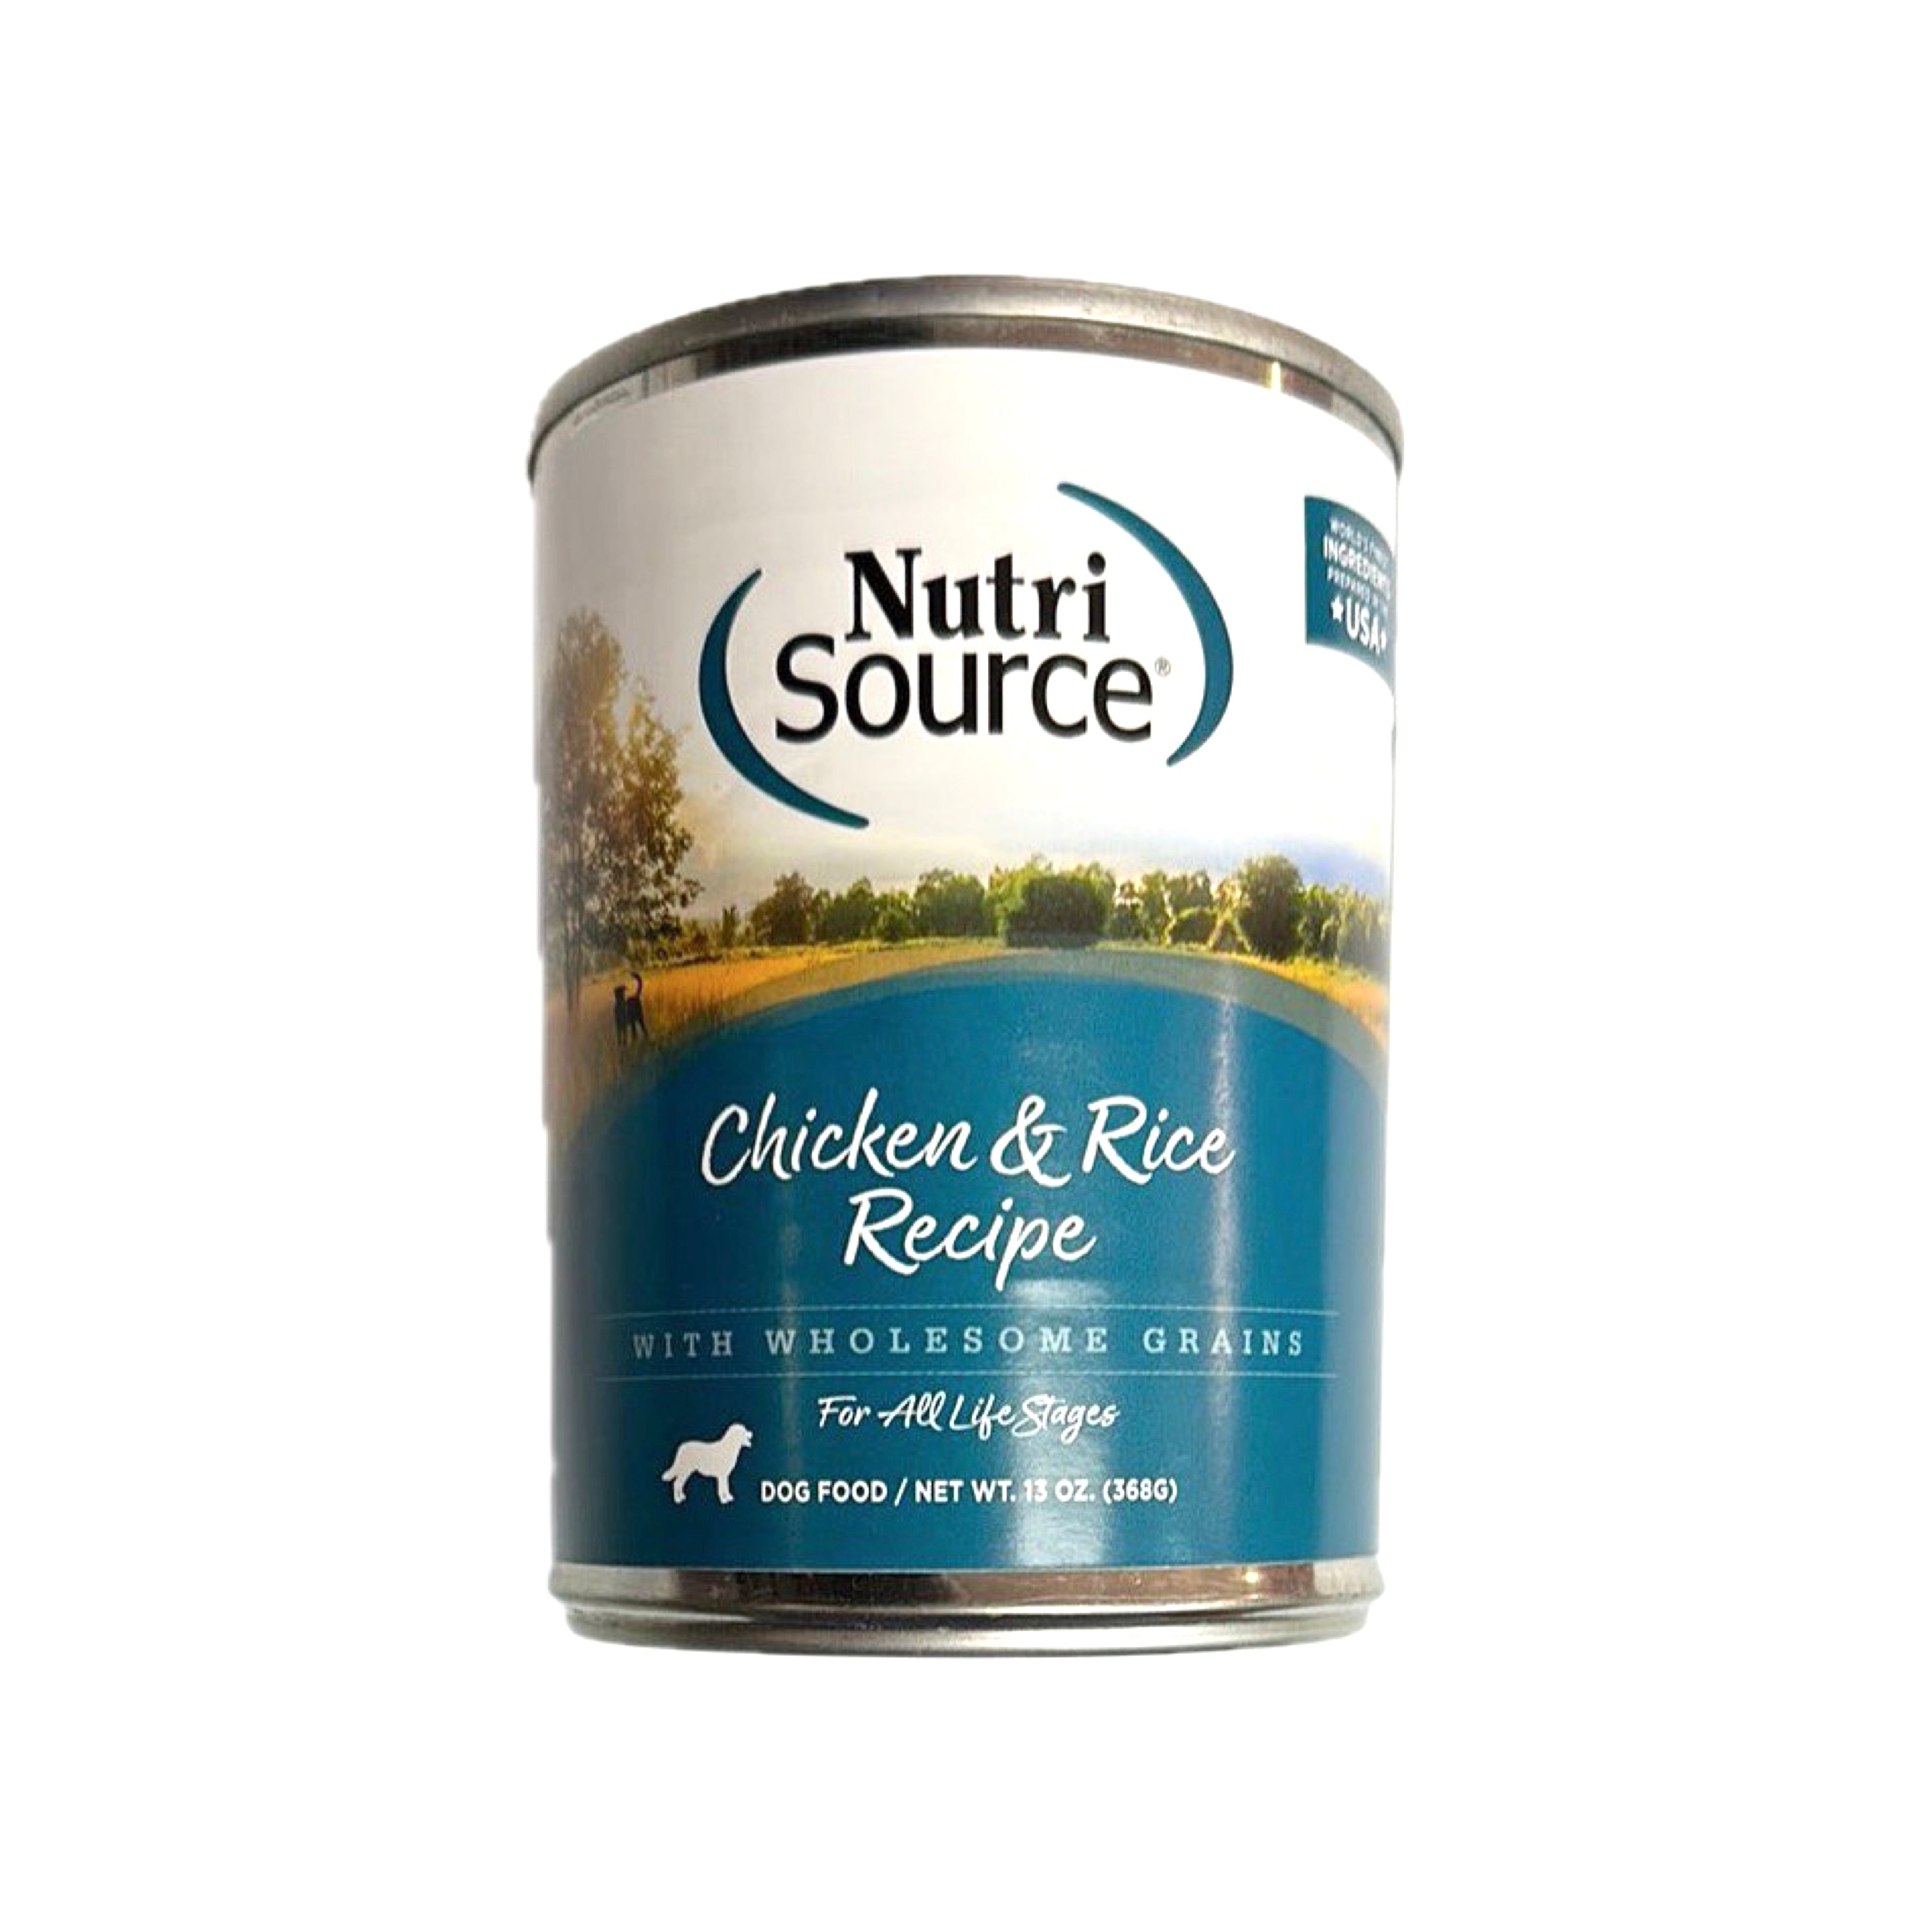 NutriSource Chicken & Rice Recipe with Wholesome Grains Canned Dog Food